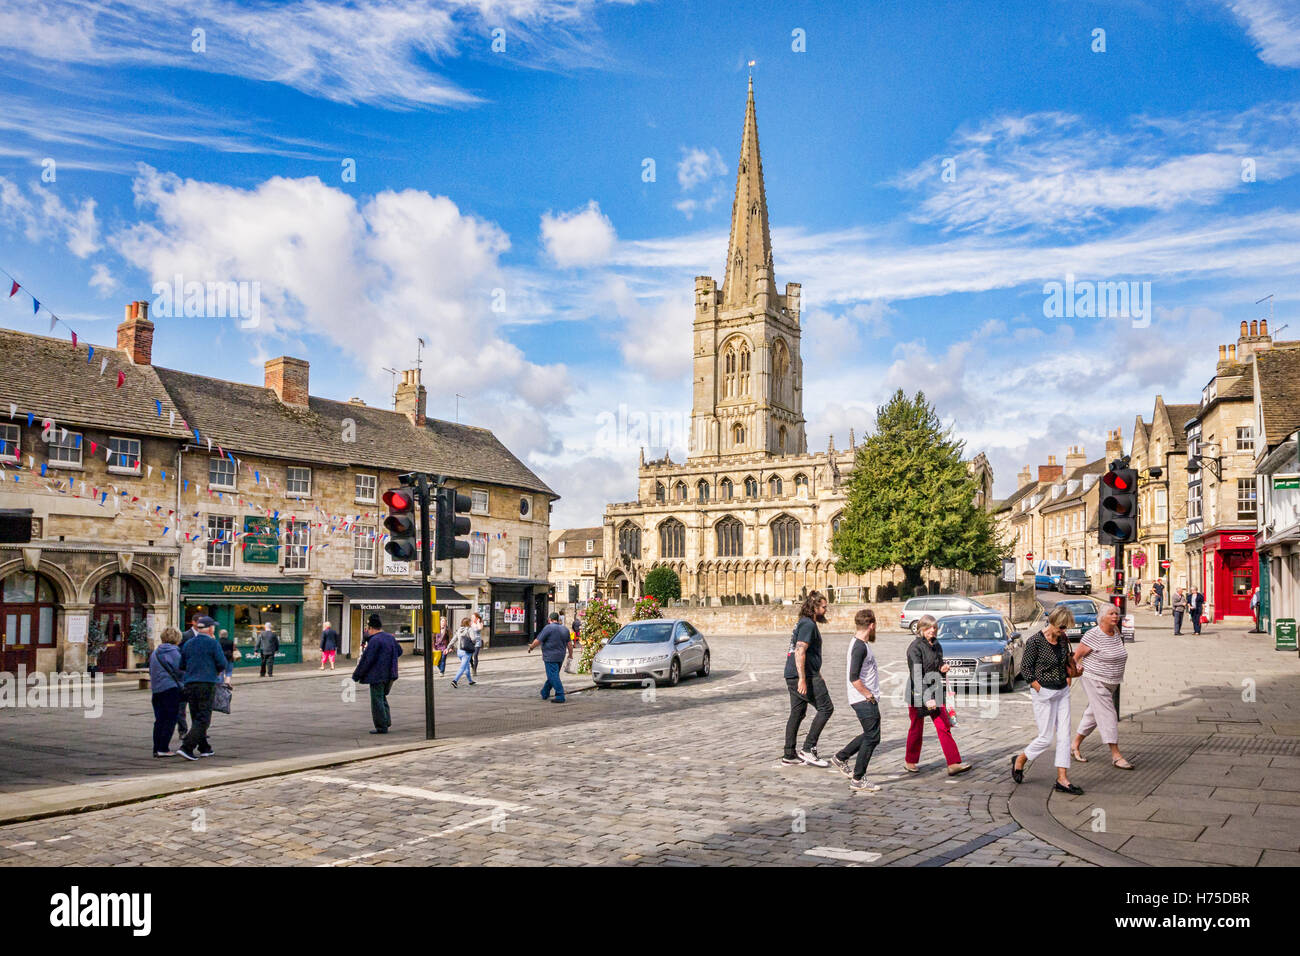 Red Lion Square, Stamford, Lincolnshire, England, UK Stock Photo